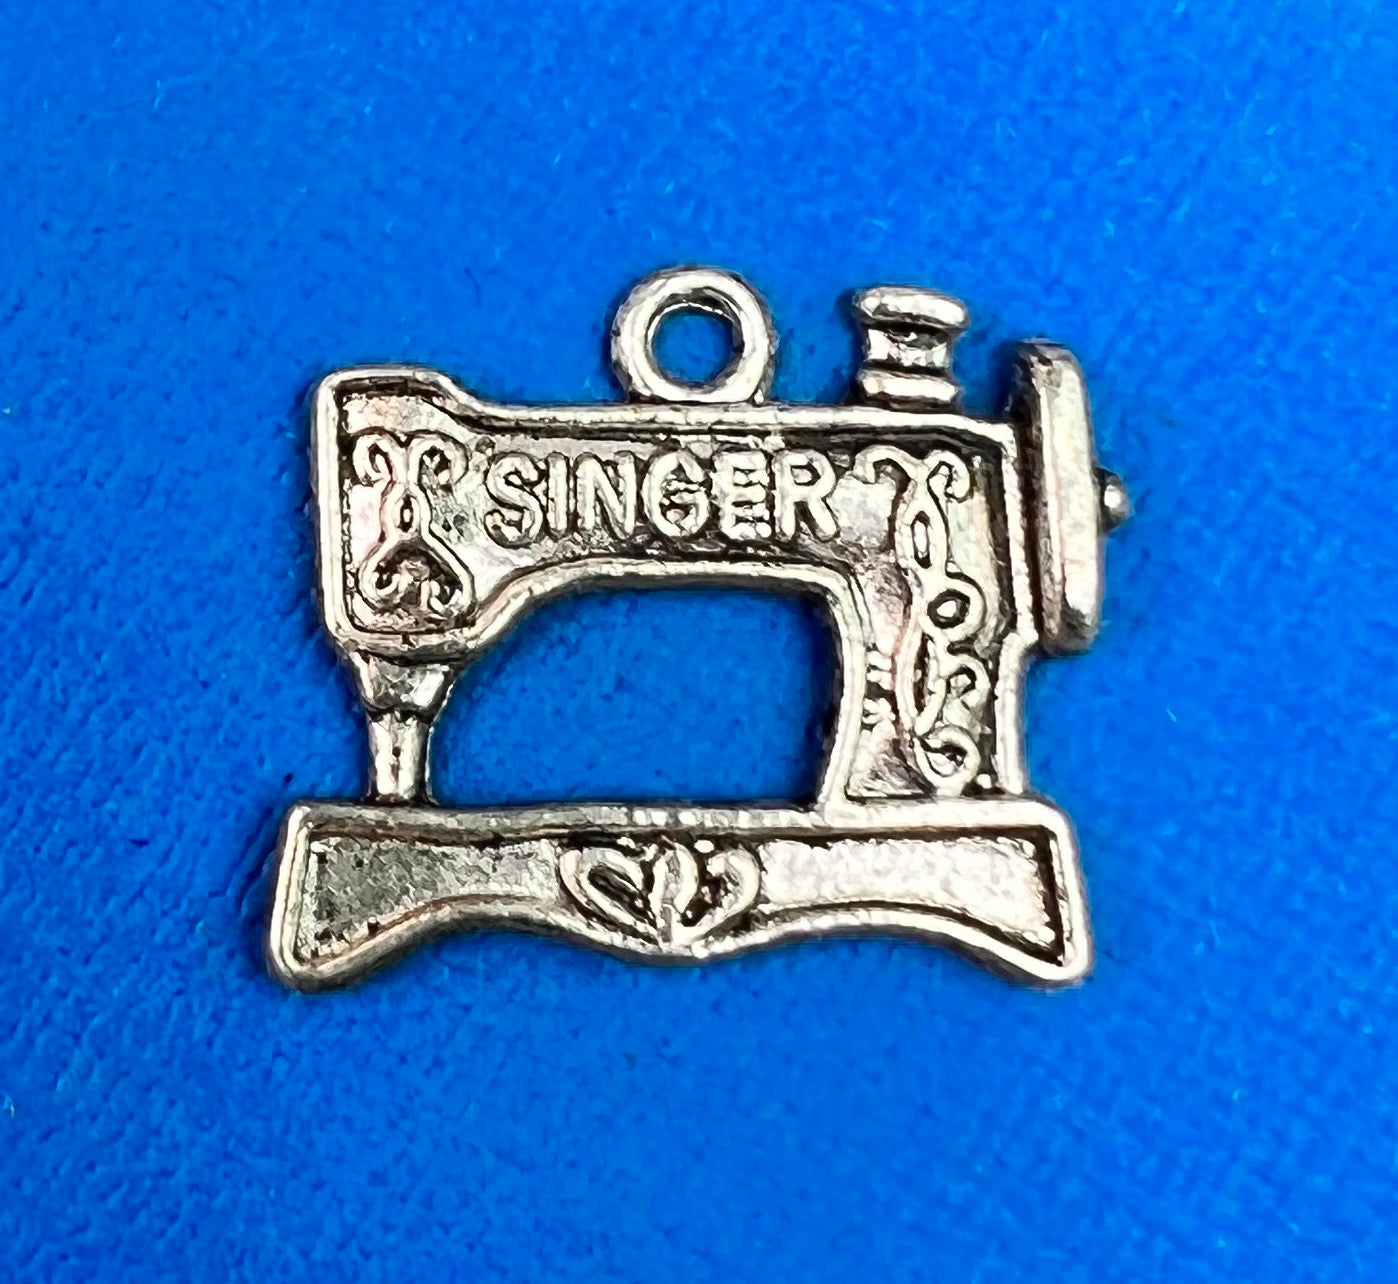 Old Fashioned Singer Sewing Machine Charm / Pendant - 2cm long